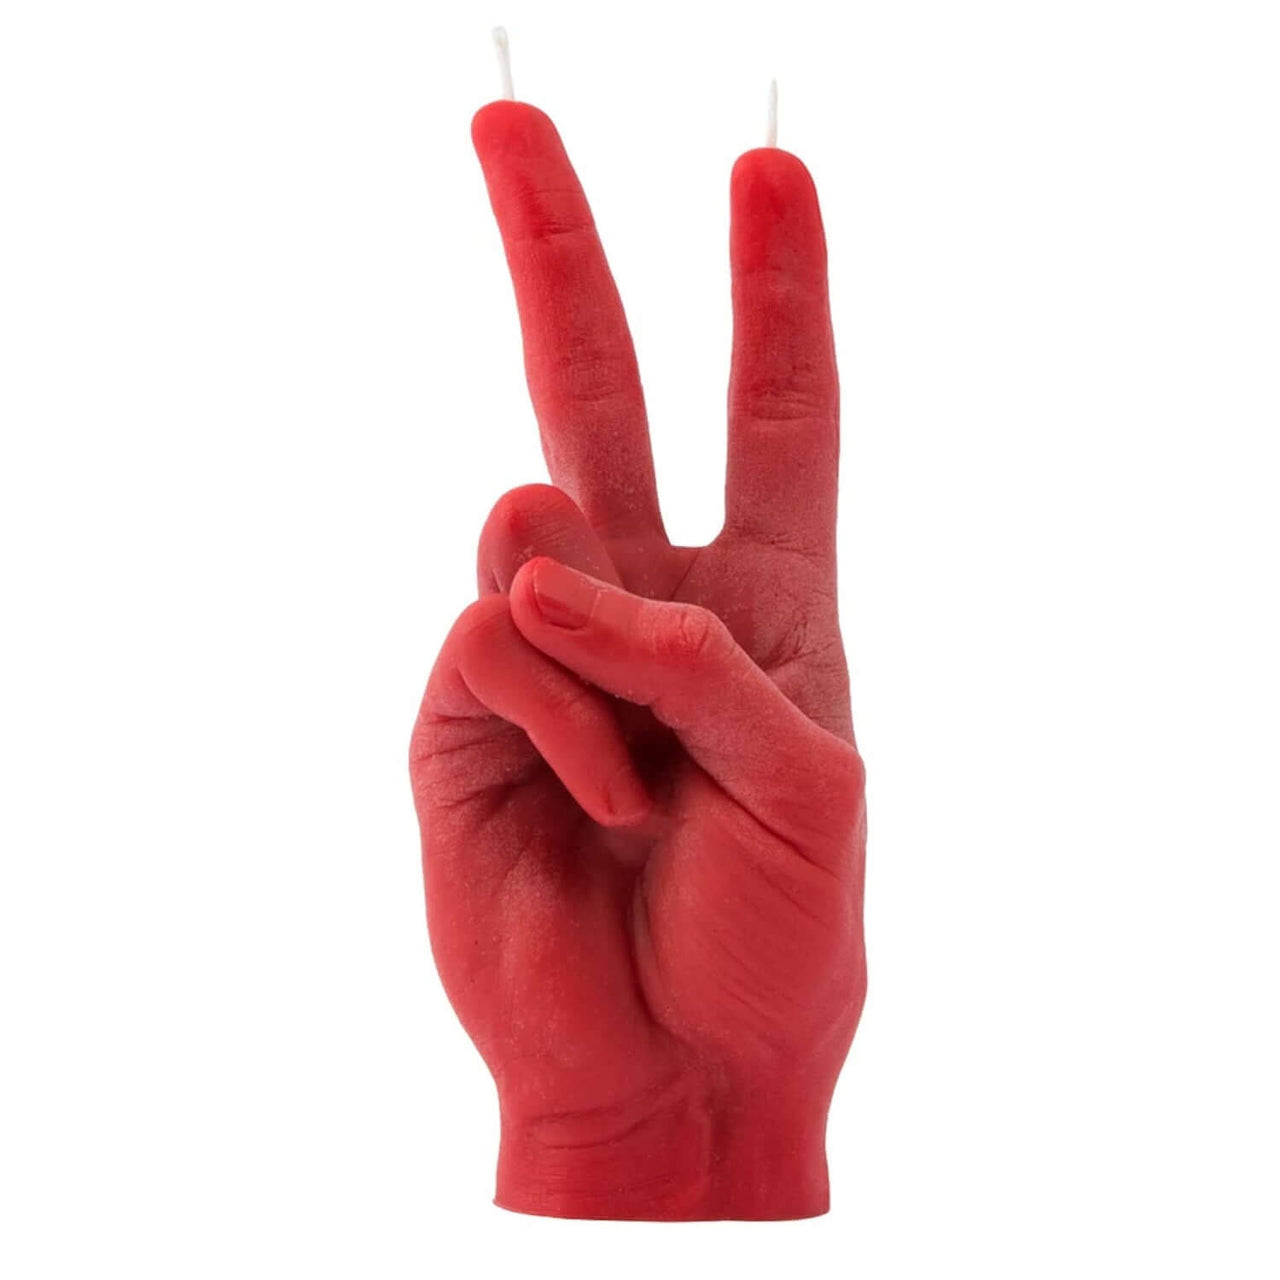 Peace (or Victory) Hand Gesture Candle Hands - Handmade with Gift Box